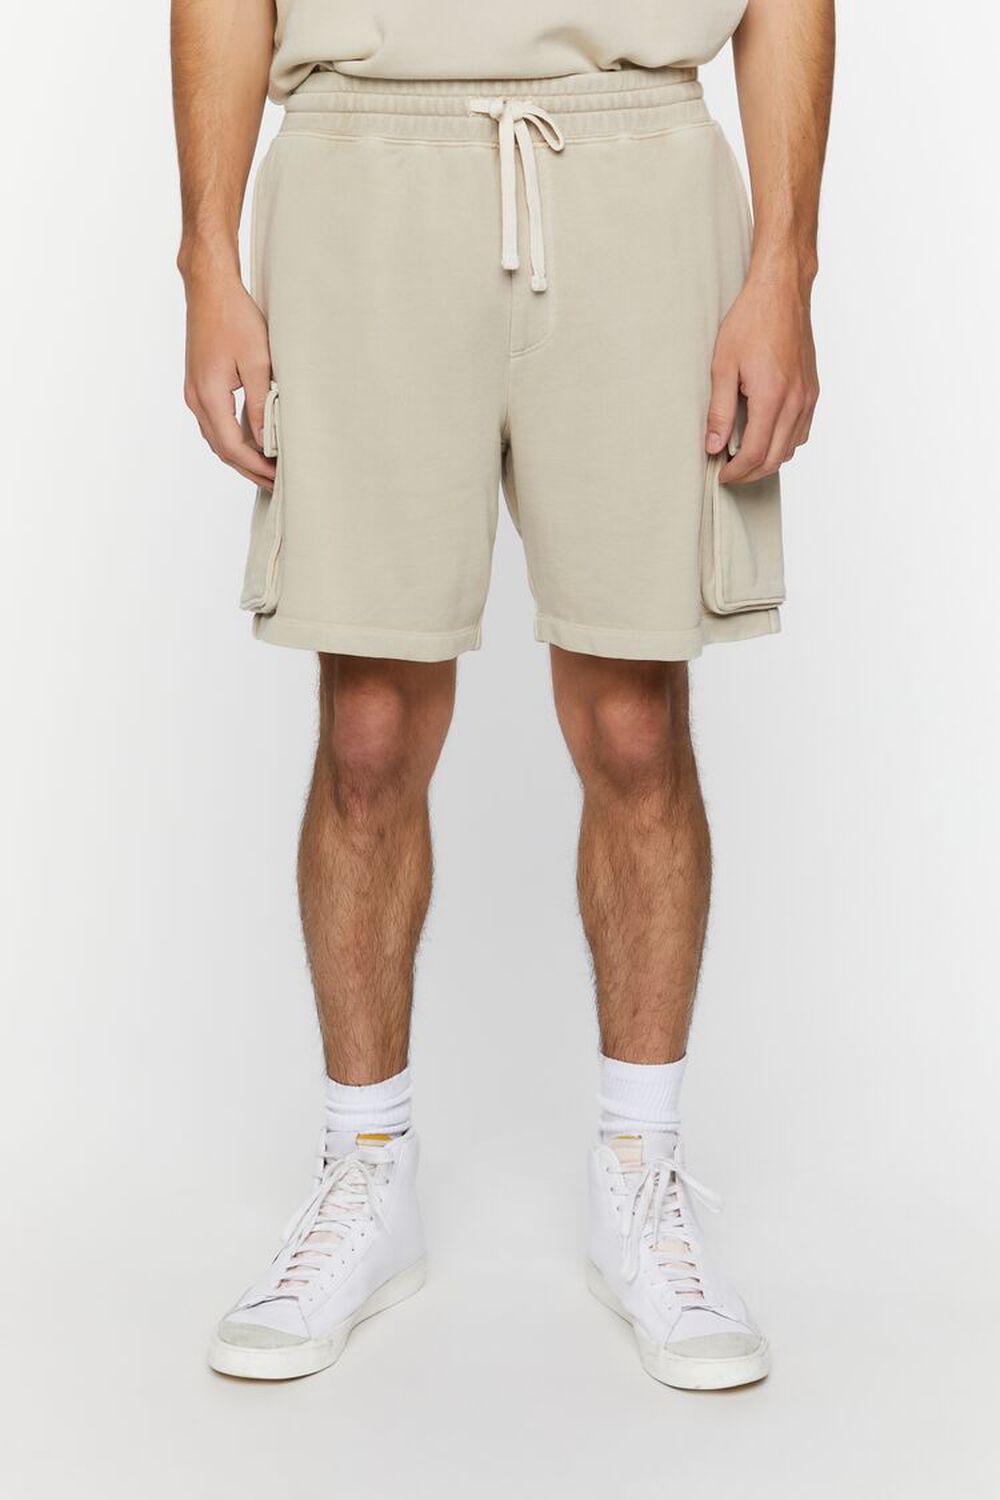 TAUPE French Terry Drawstring Cargo Shorts, image 2